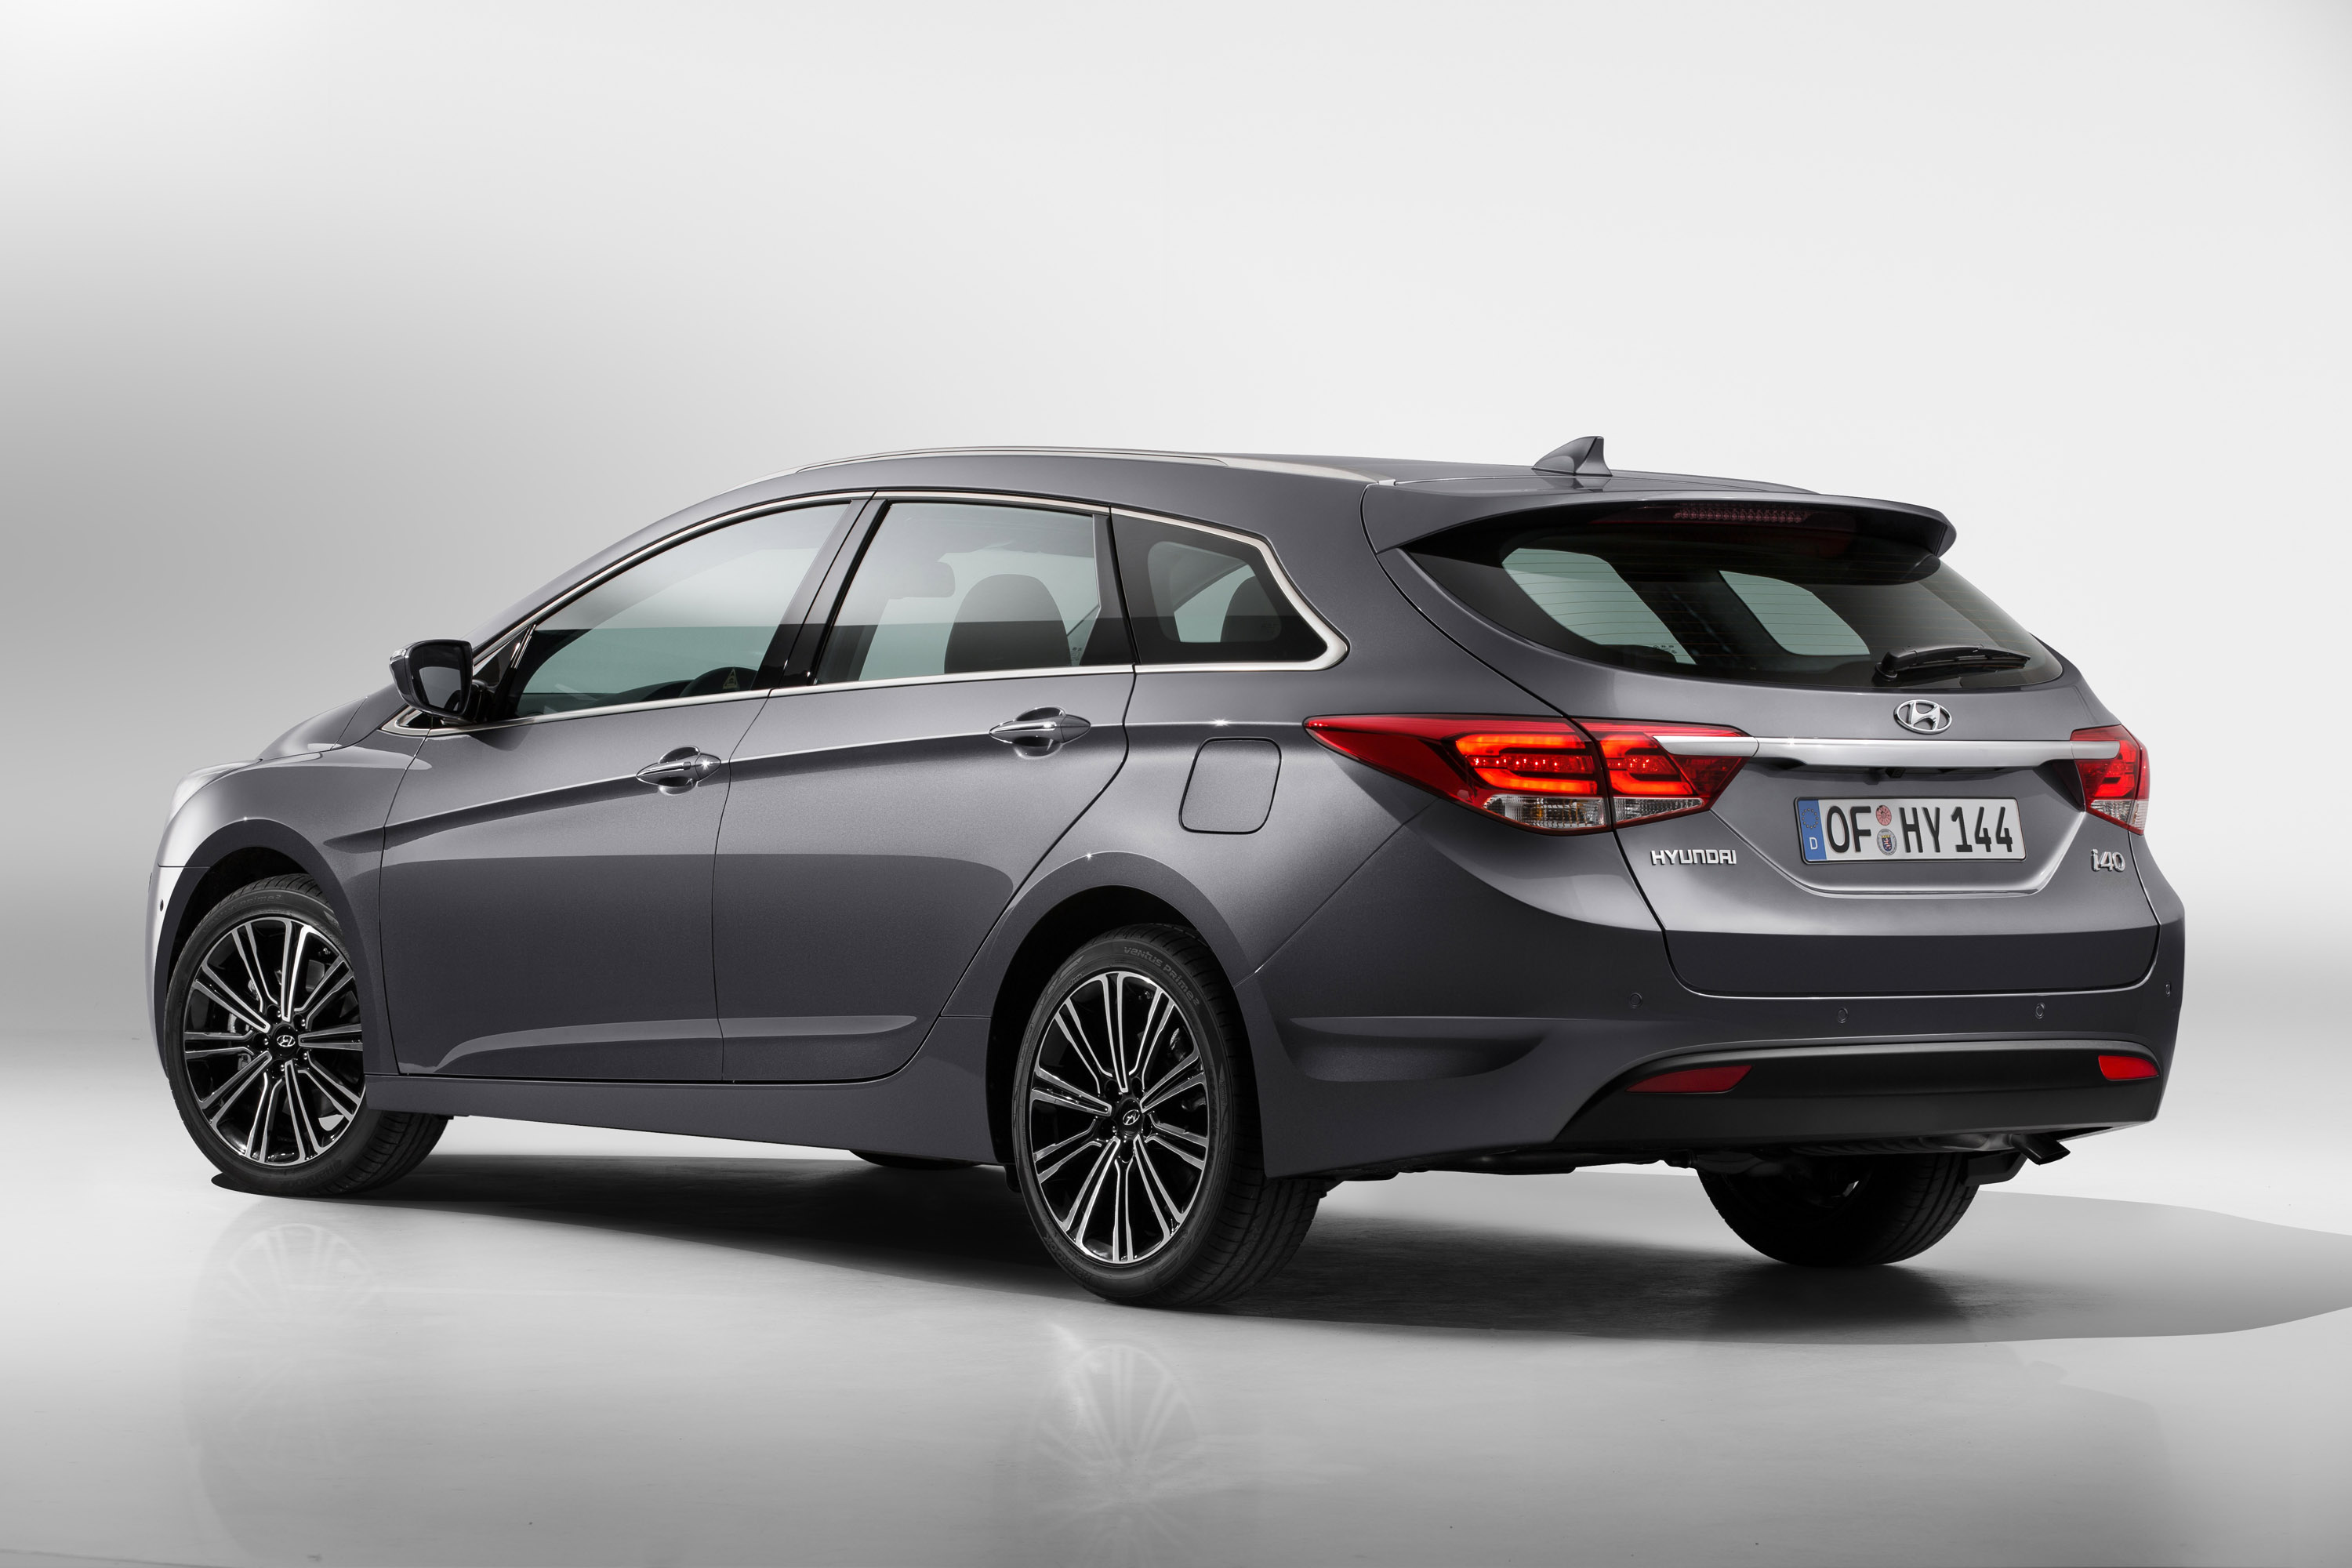 2015 Hyundai i40 HD Pictures